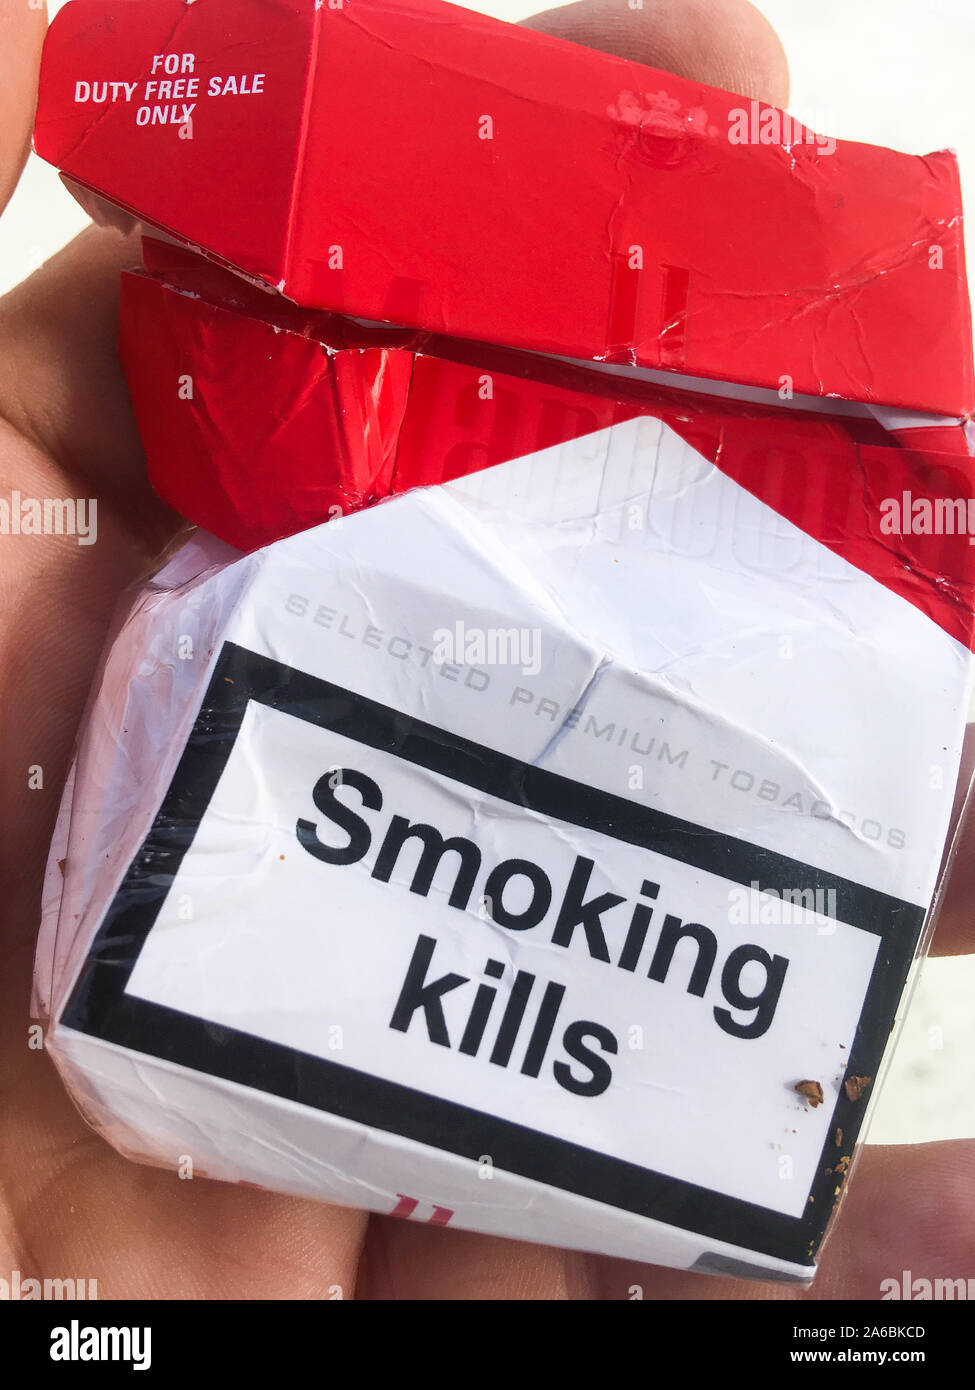 A Marlboro cigarettes pack sold in Duty-free shop, France Stock Photo -  Alamy